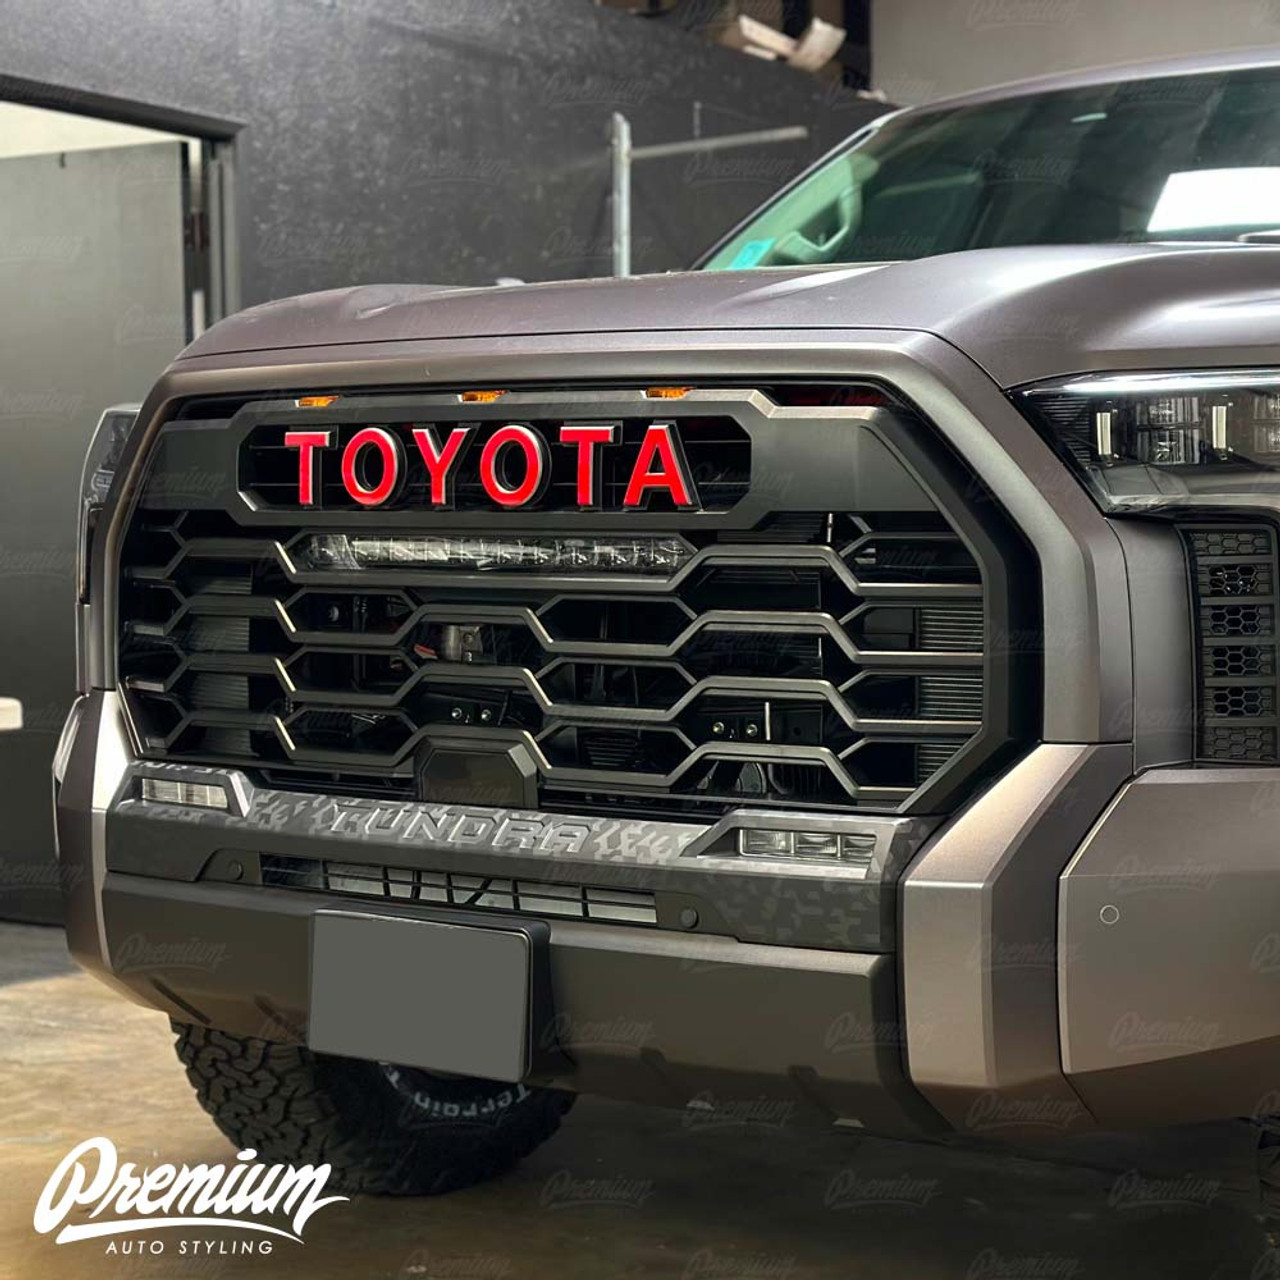 TRD Pro Grille Lettering Vinyl Overlays Multiple Colors Available